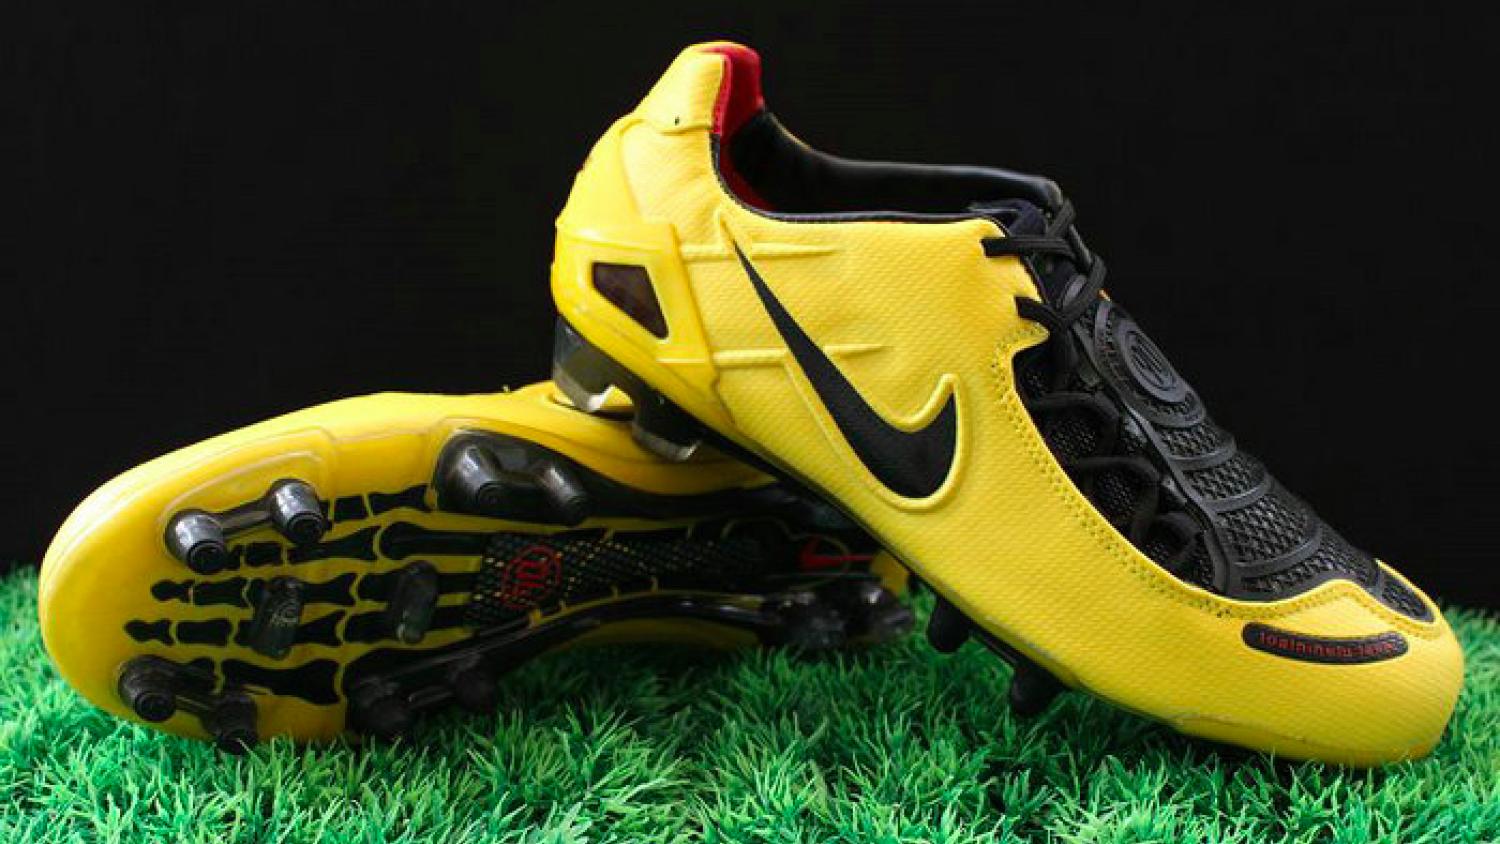 Descarte Molesto Guión Nike Is Remaking The Greatest Boot Of All Time: Total 90 Laser I